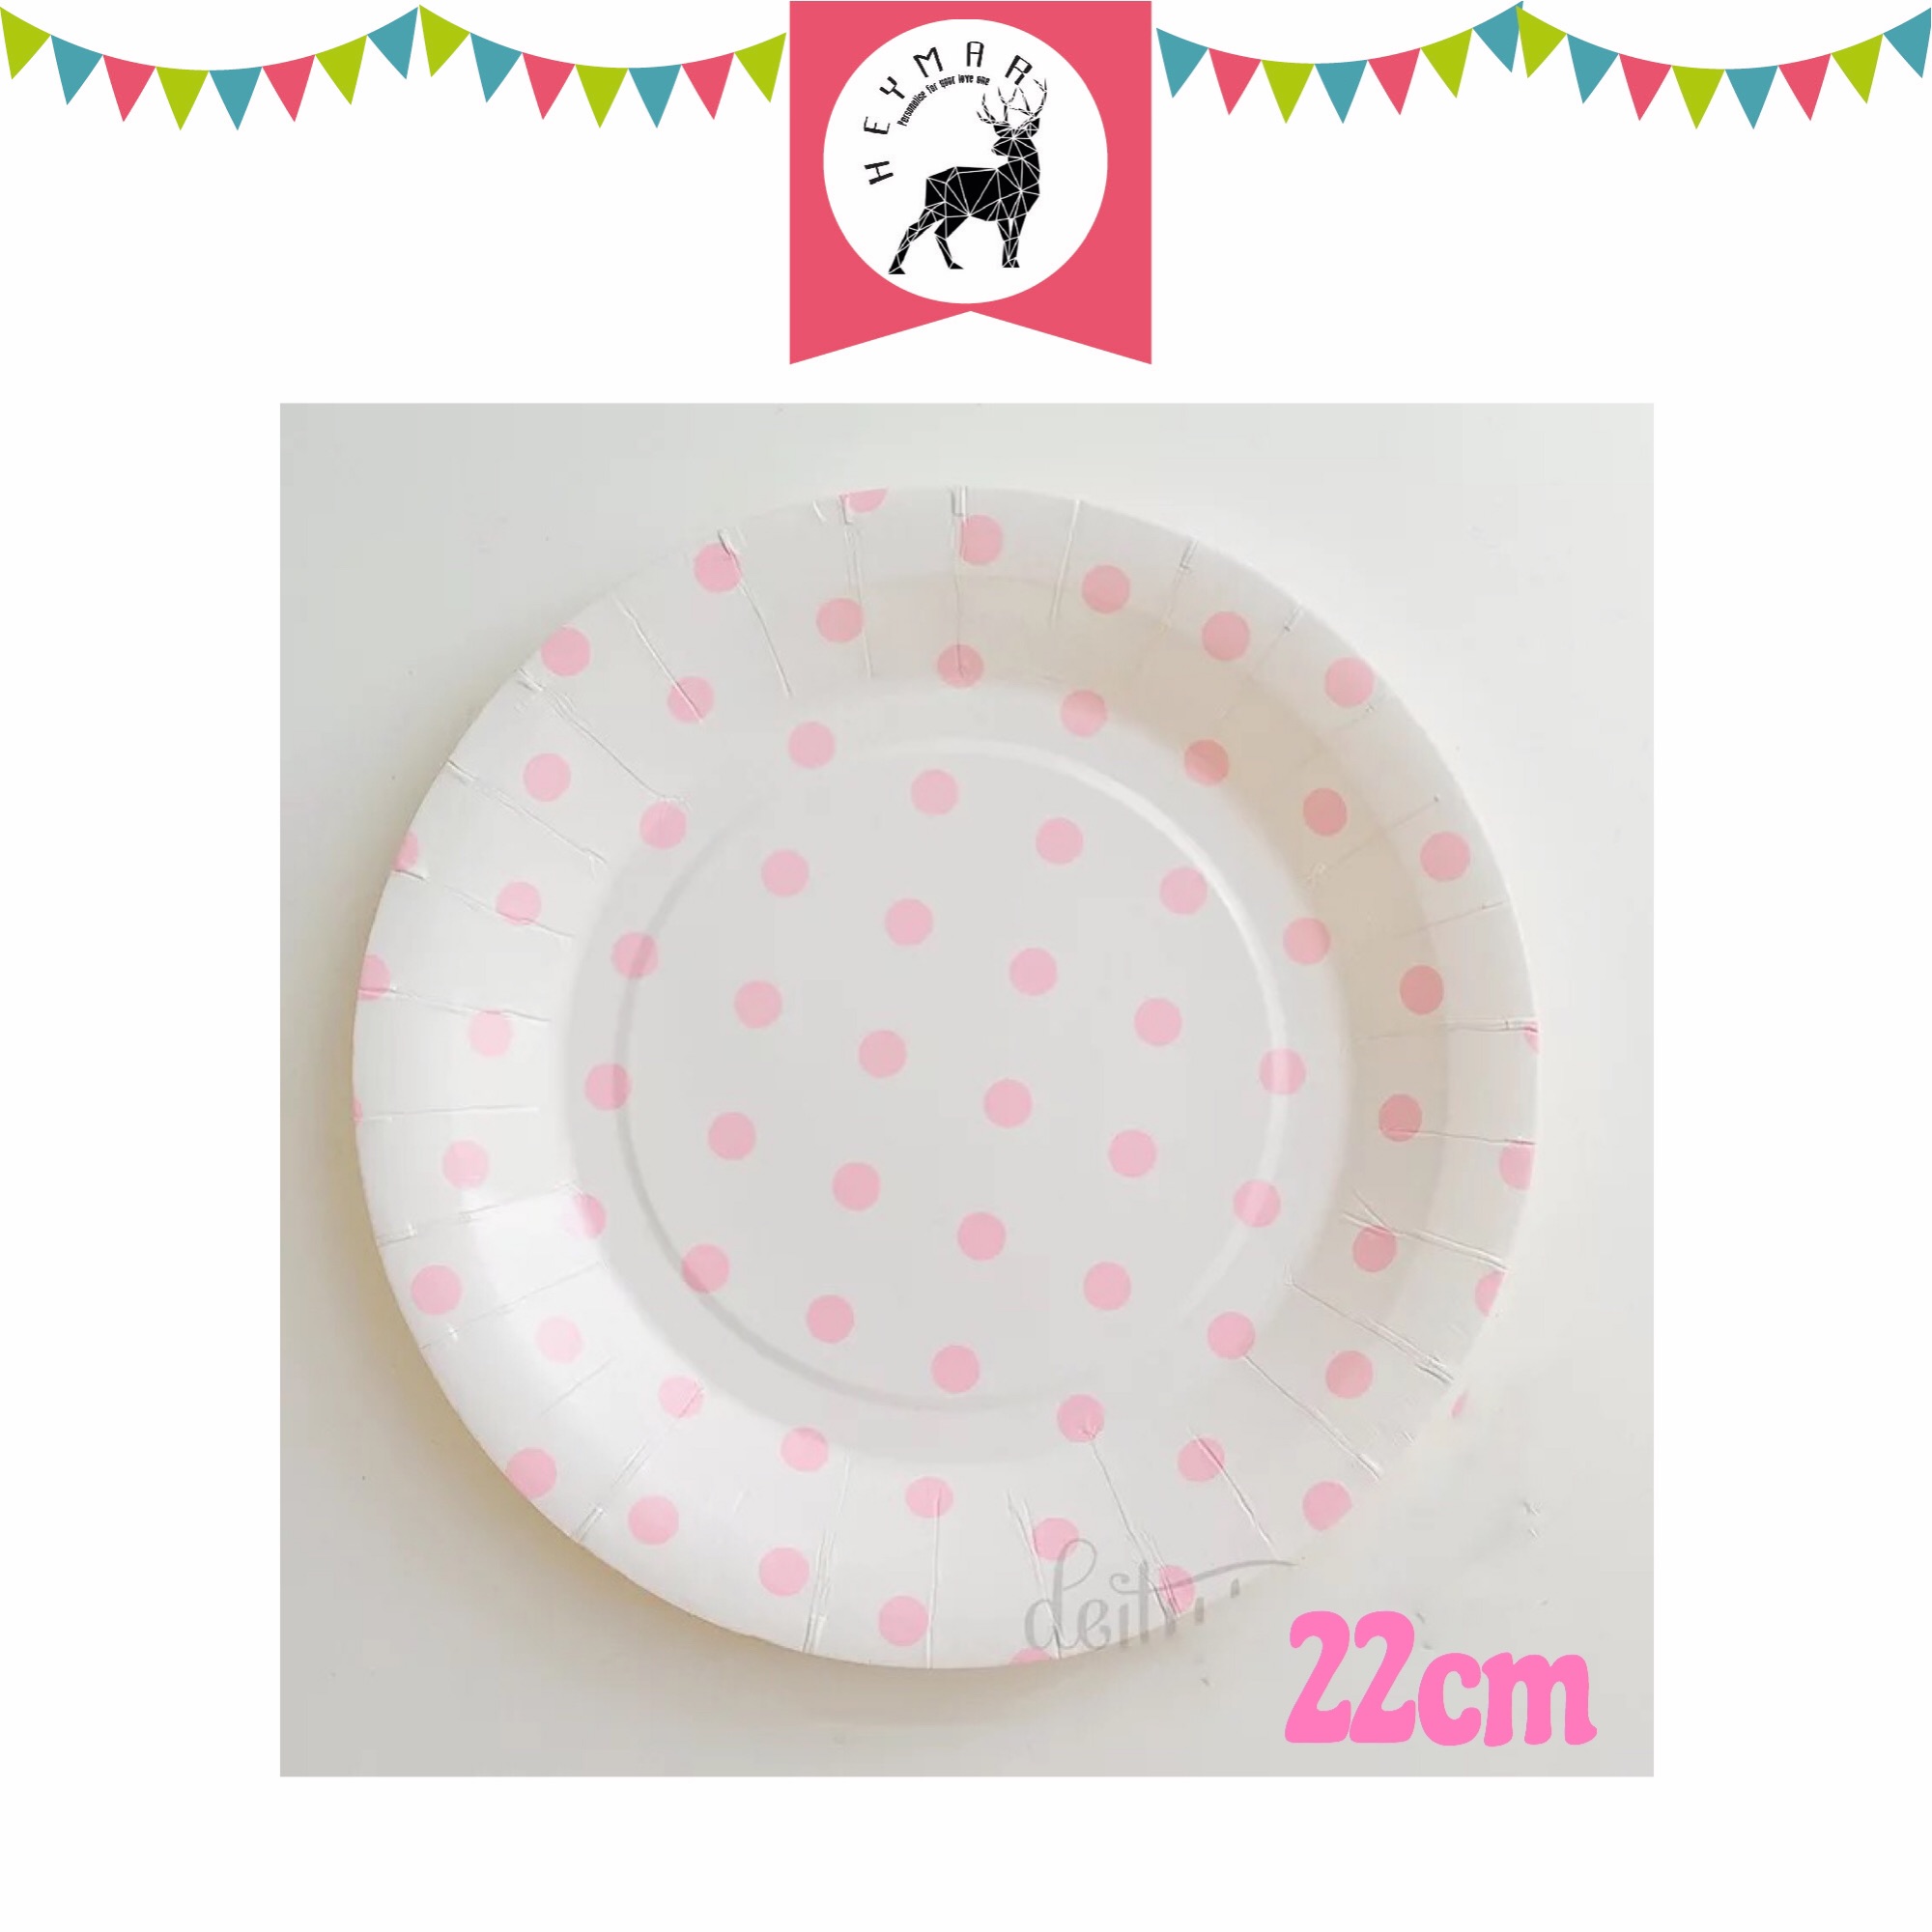 PARTY BOX polka dots paper plate tableware 22cm — FREE pink party decorations disposable polka dots tissue paper 16cm